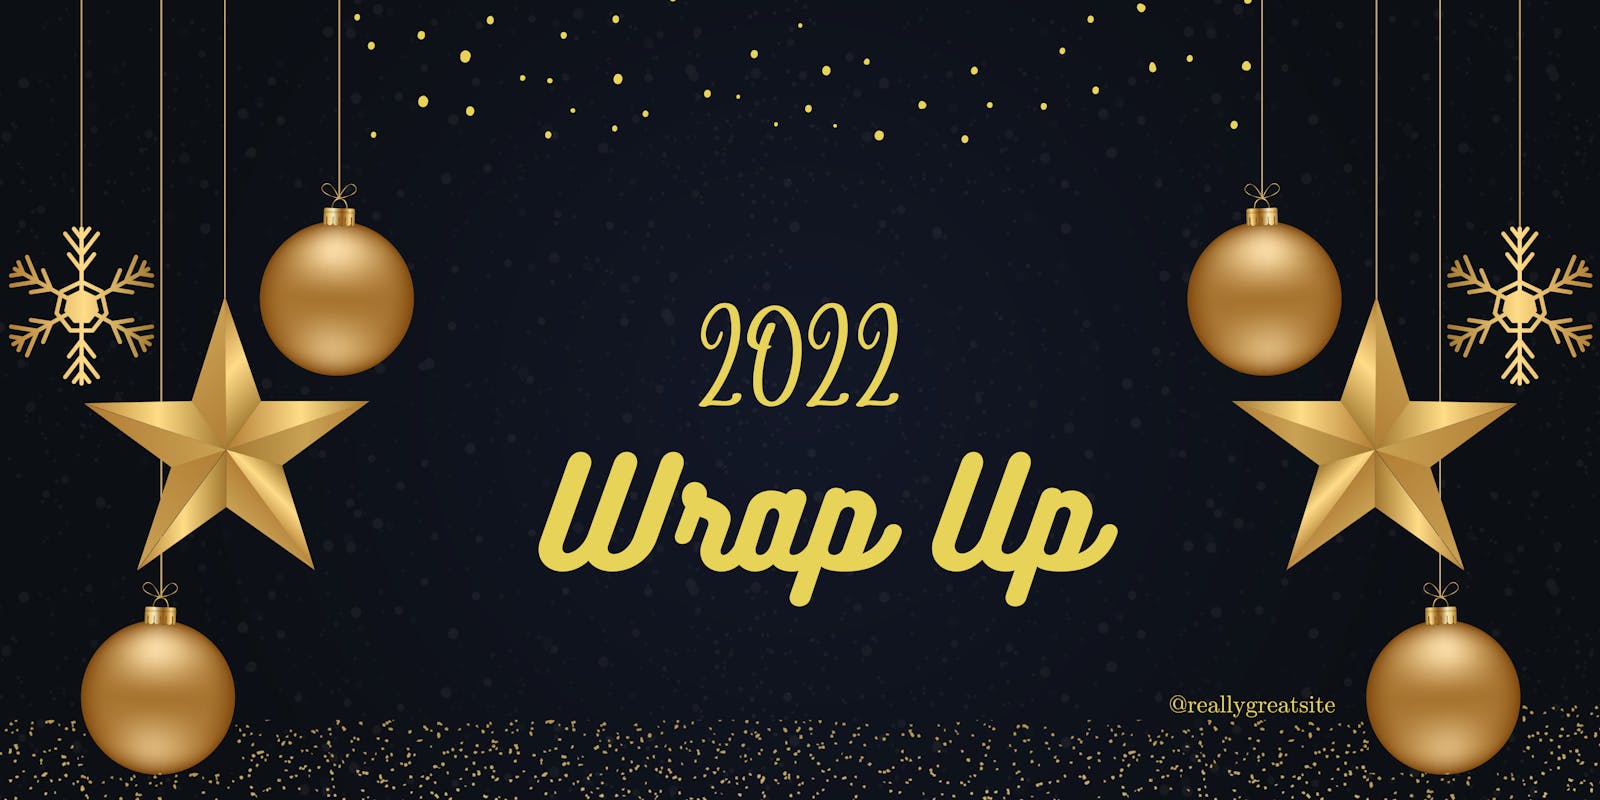 2022 Wrap Up - A Journey To Open Source.